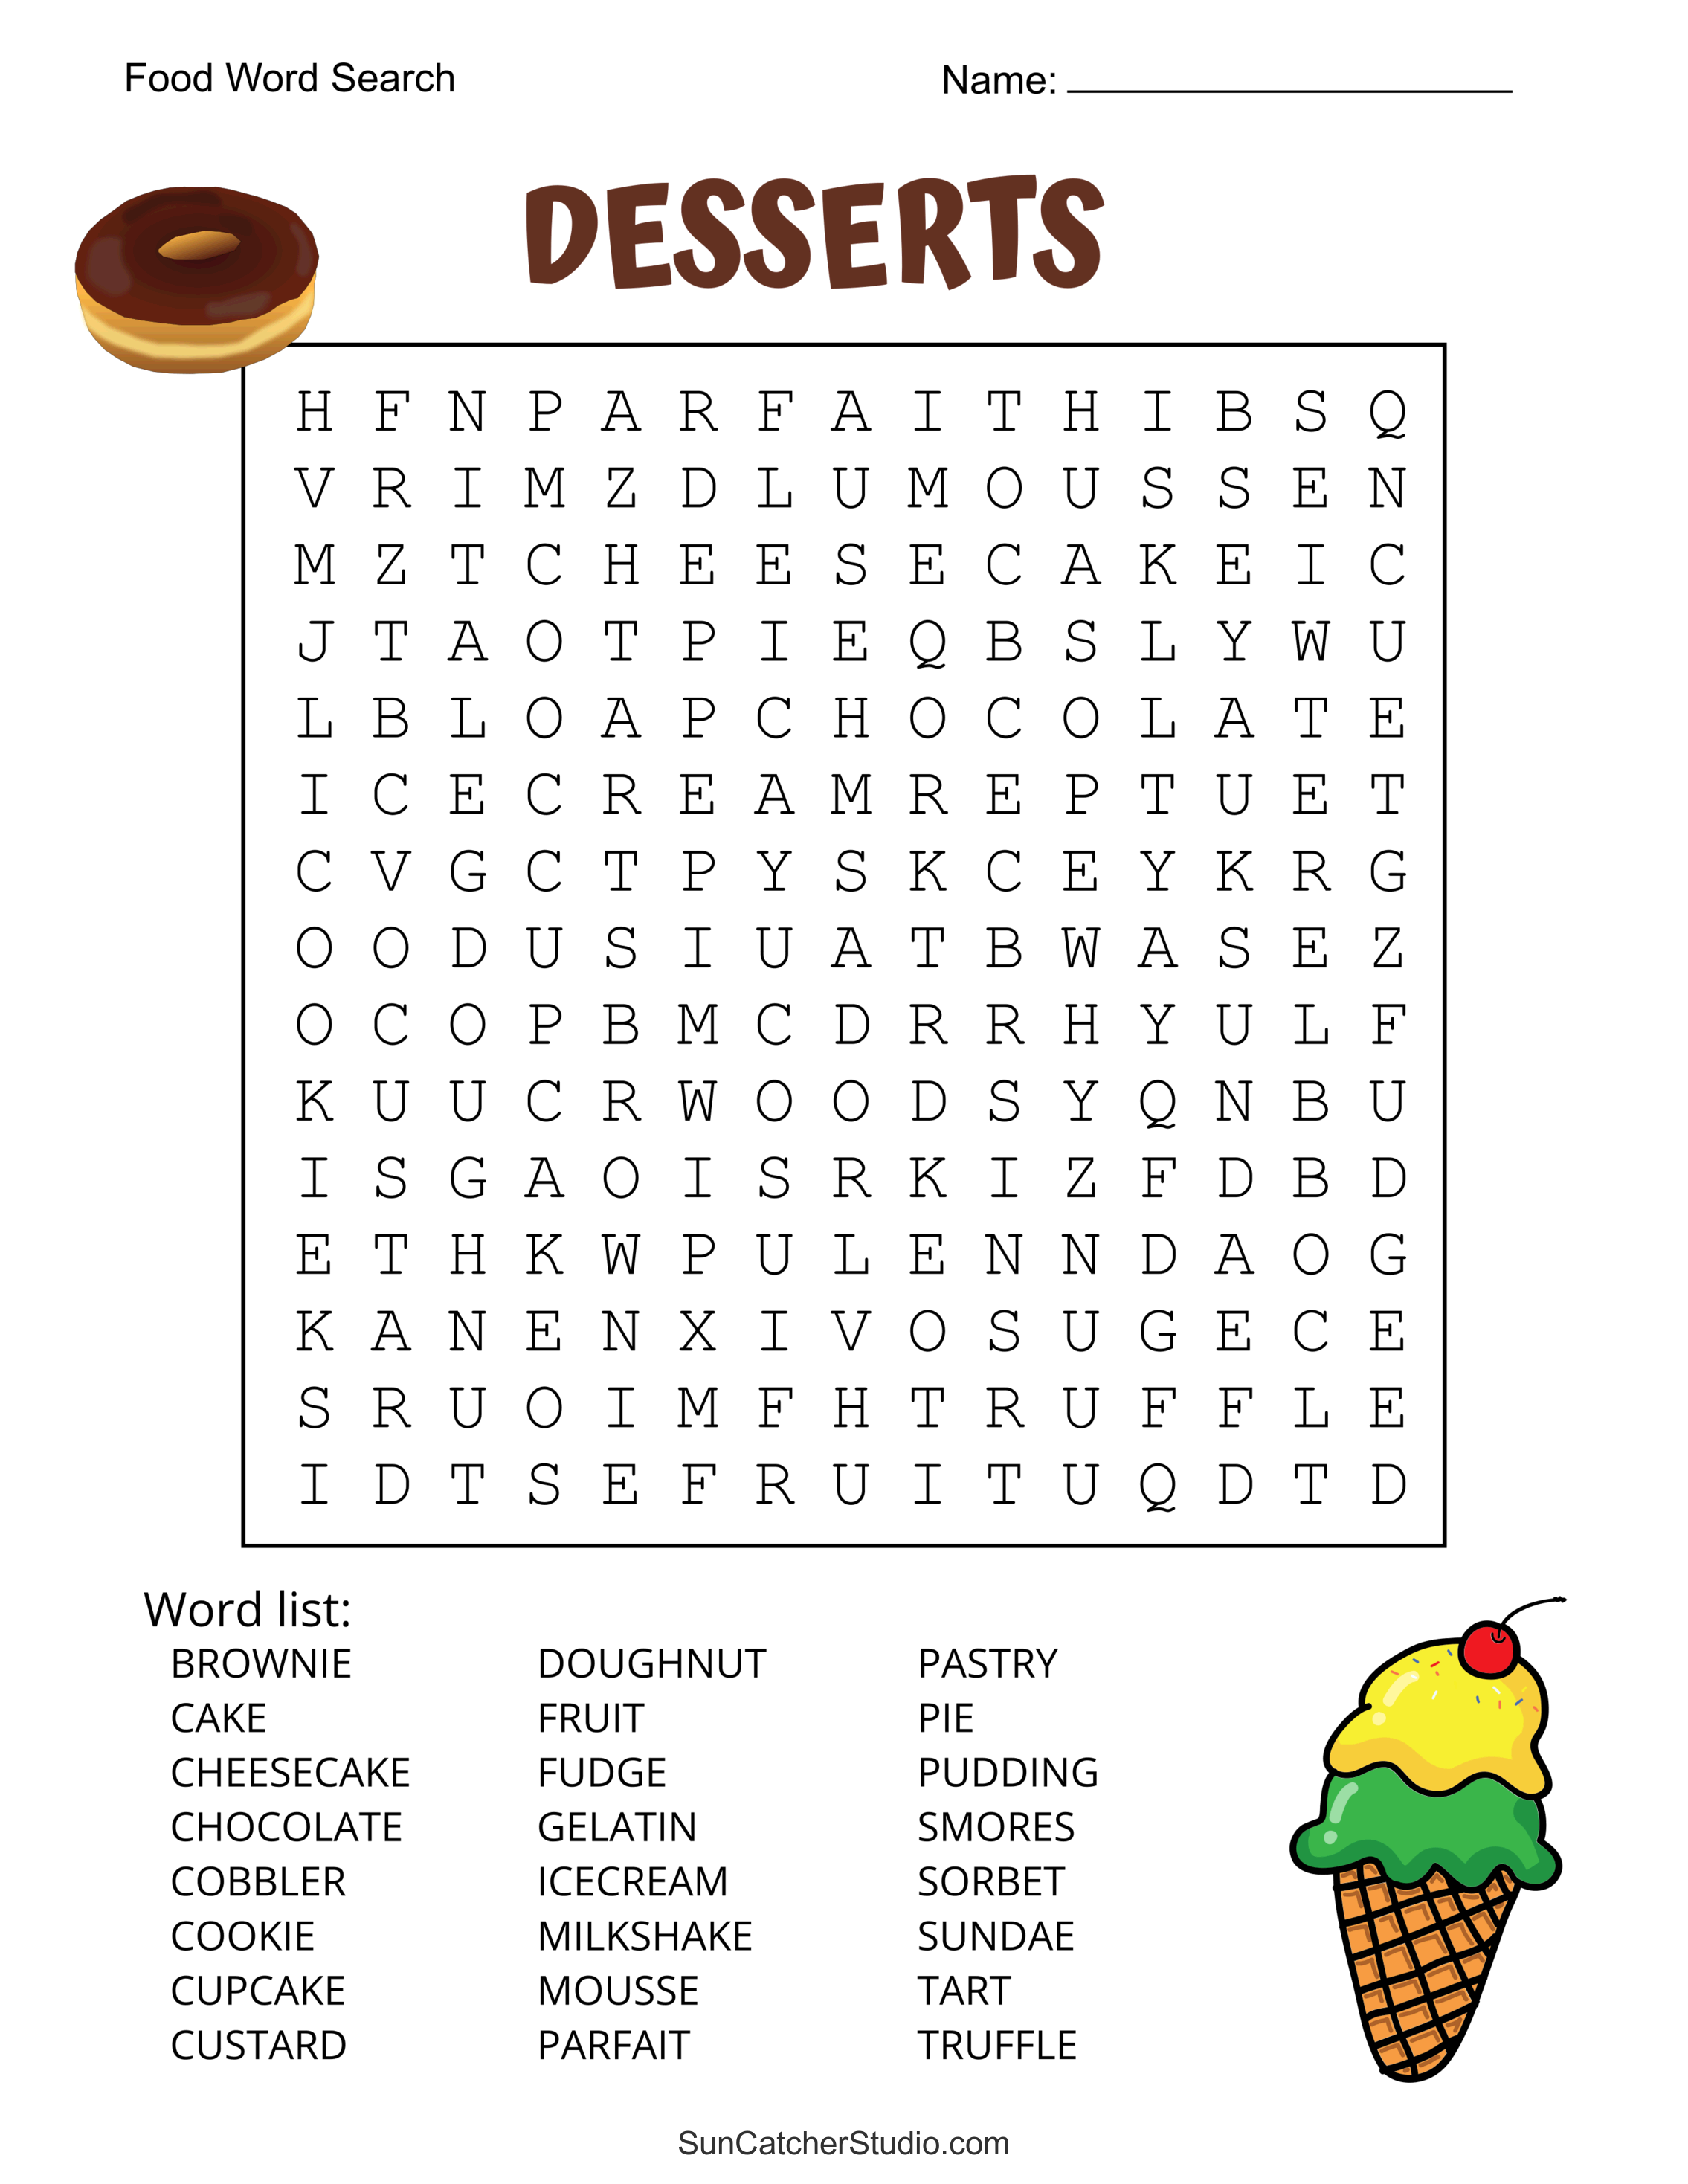 Food Word Search (Free Printable Puzzles) – DIY Projects, Patterns ...